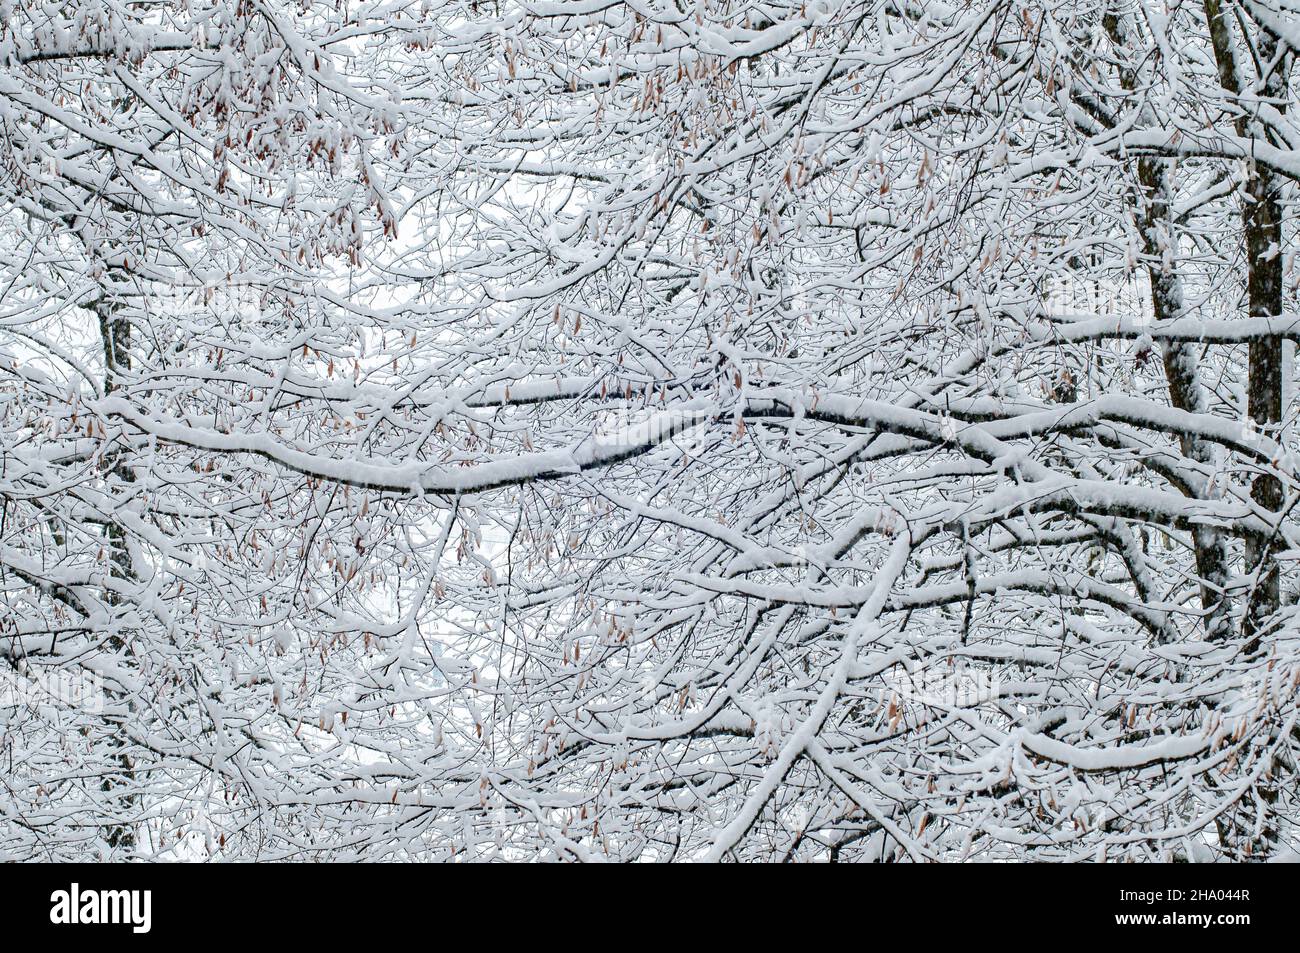 Tree branches in winter covered with snow, natural background Stock Photo